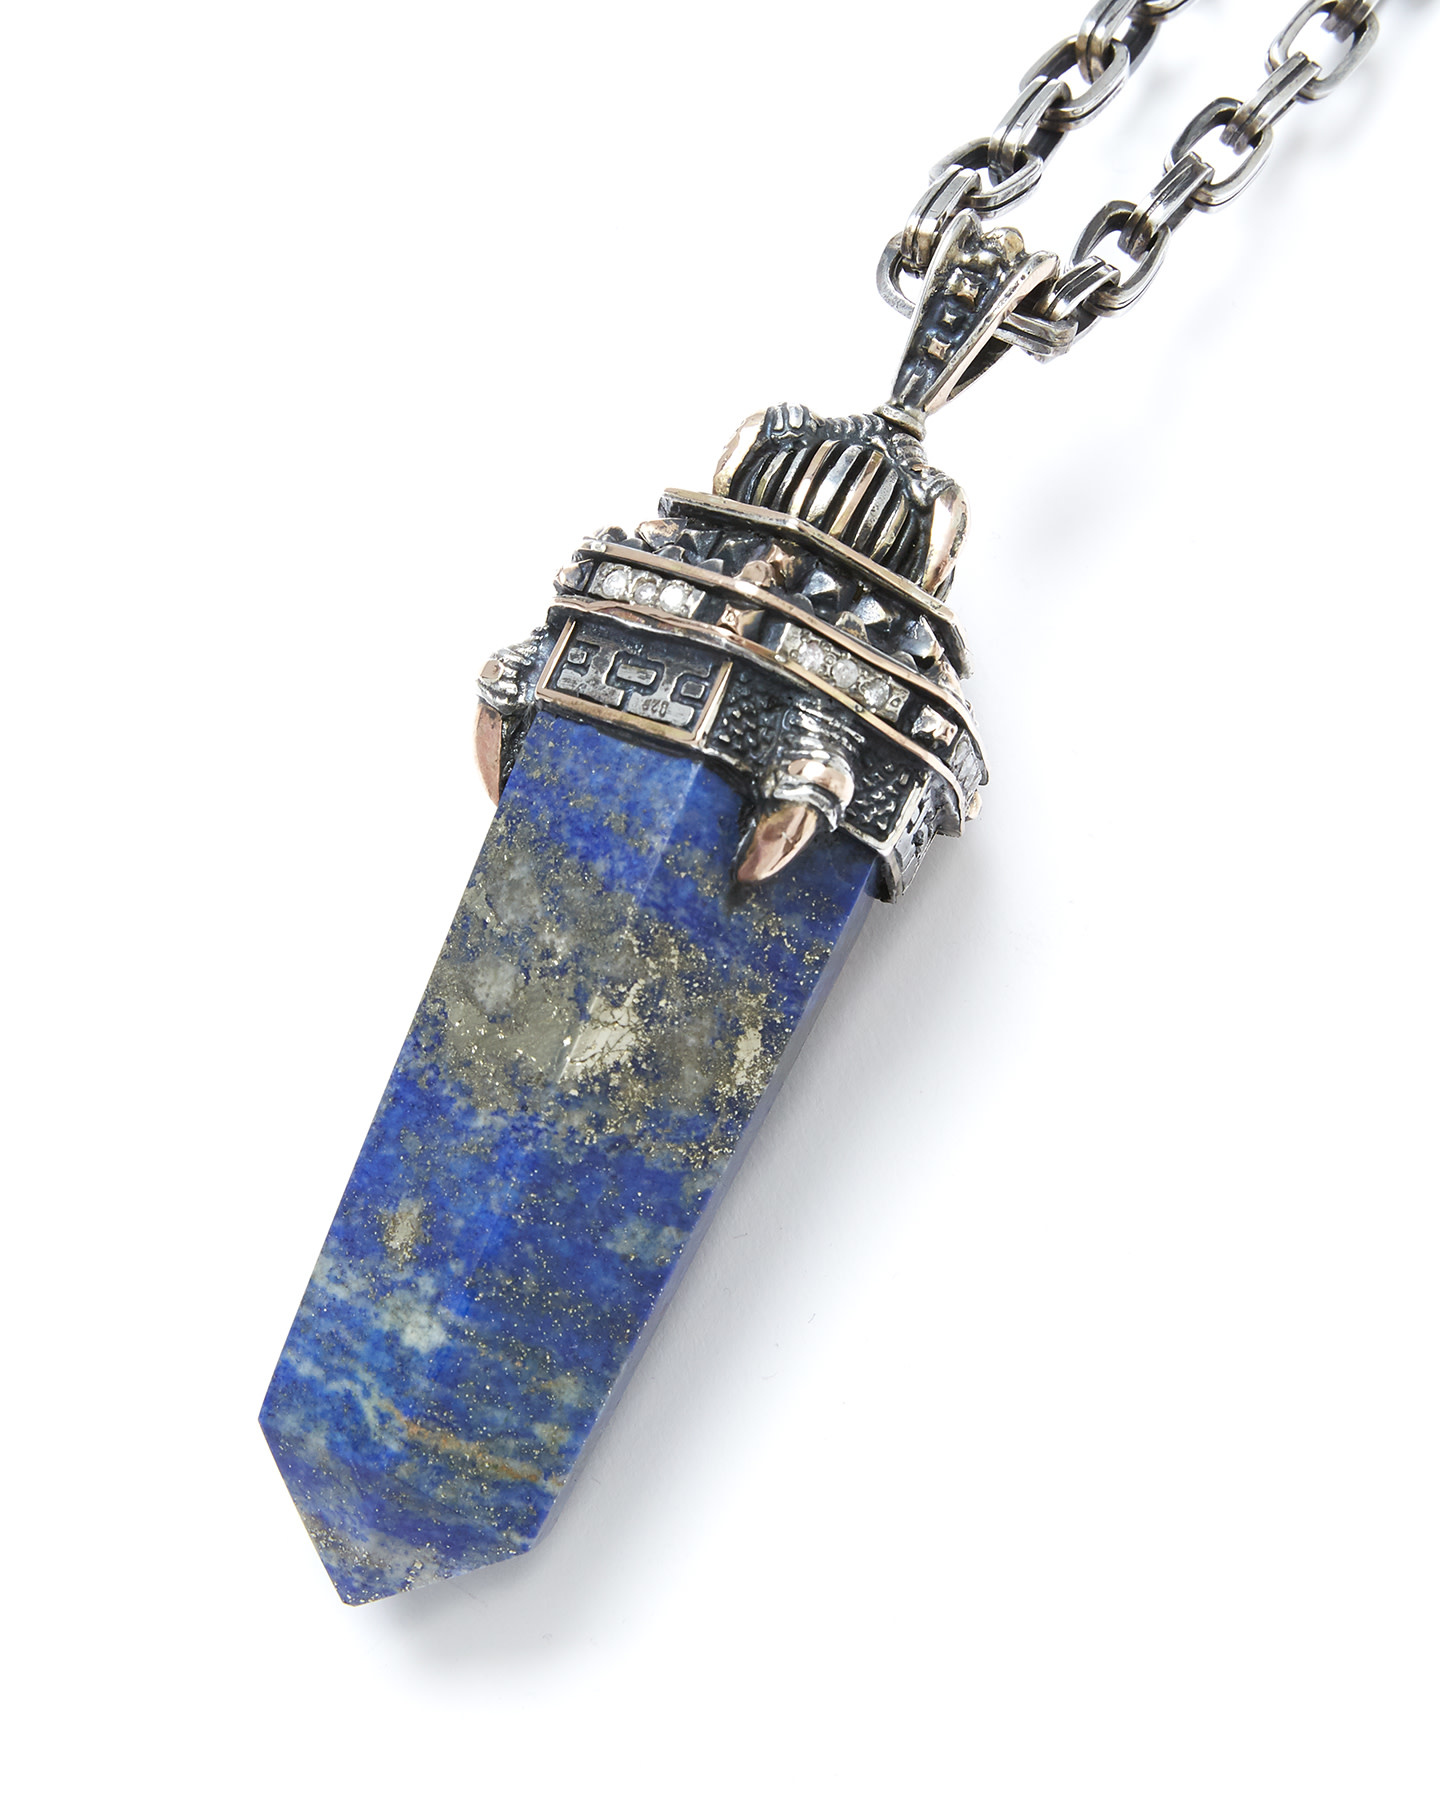 AT50 Lapis, Sterling or 14k Gold